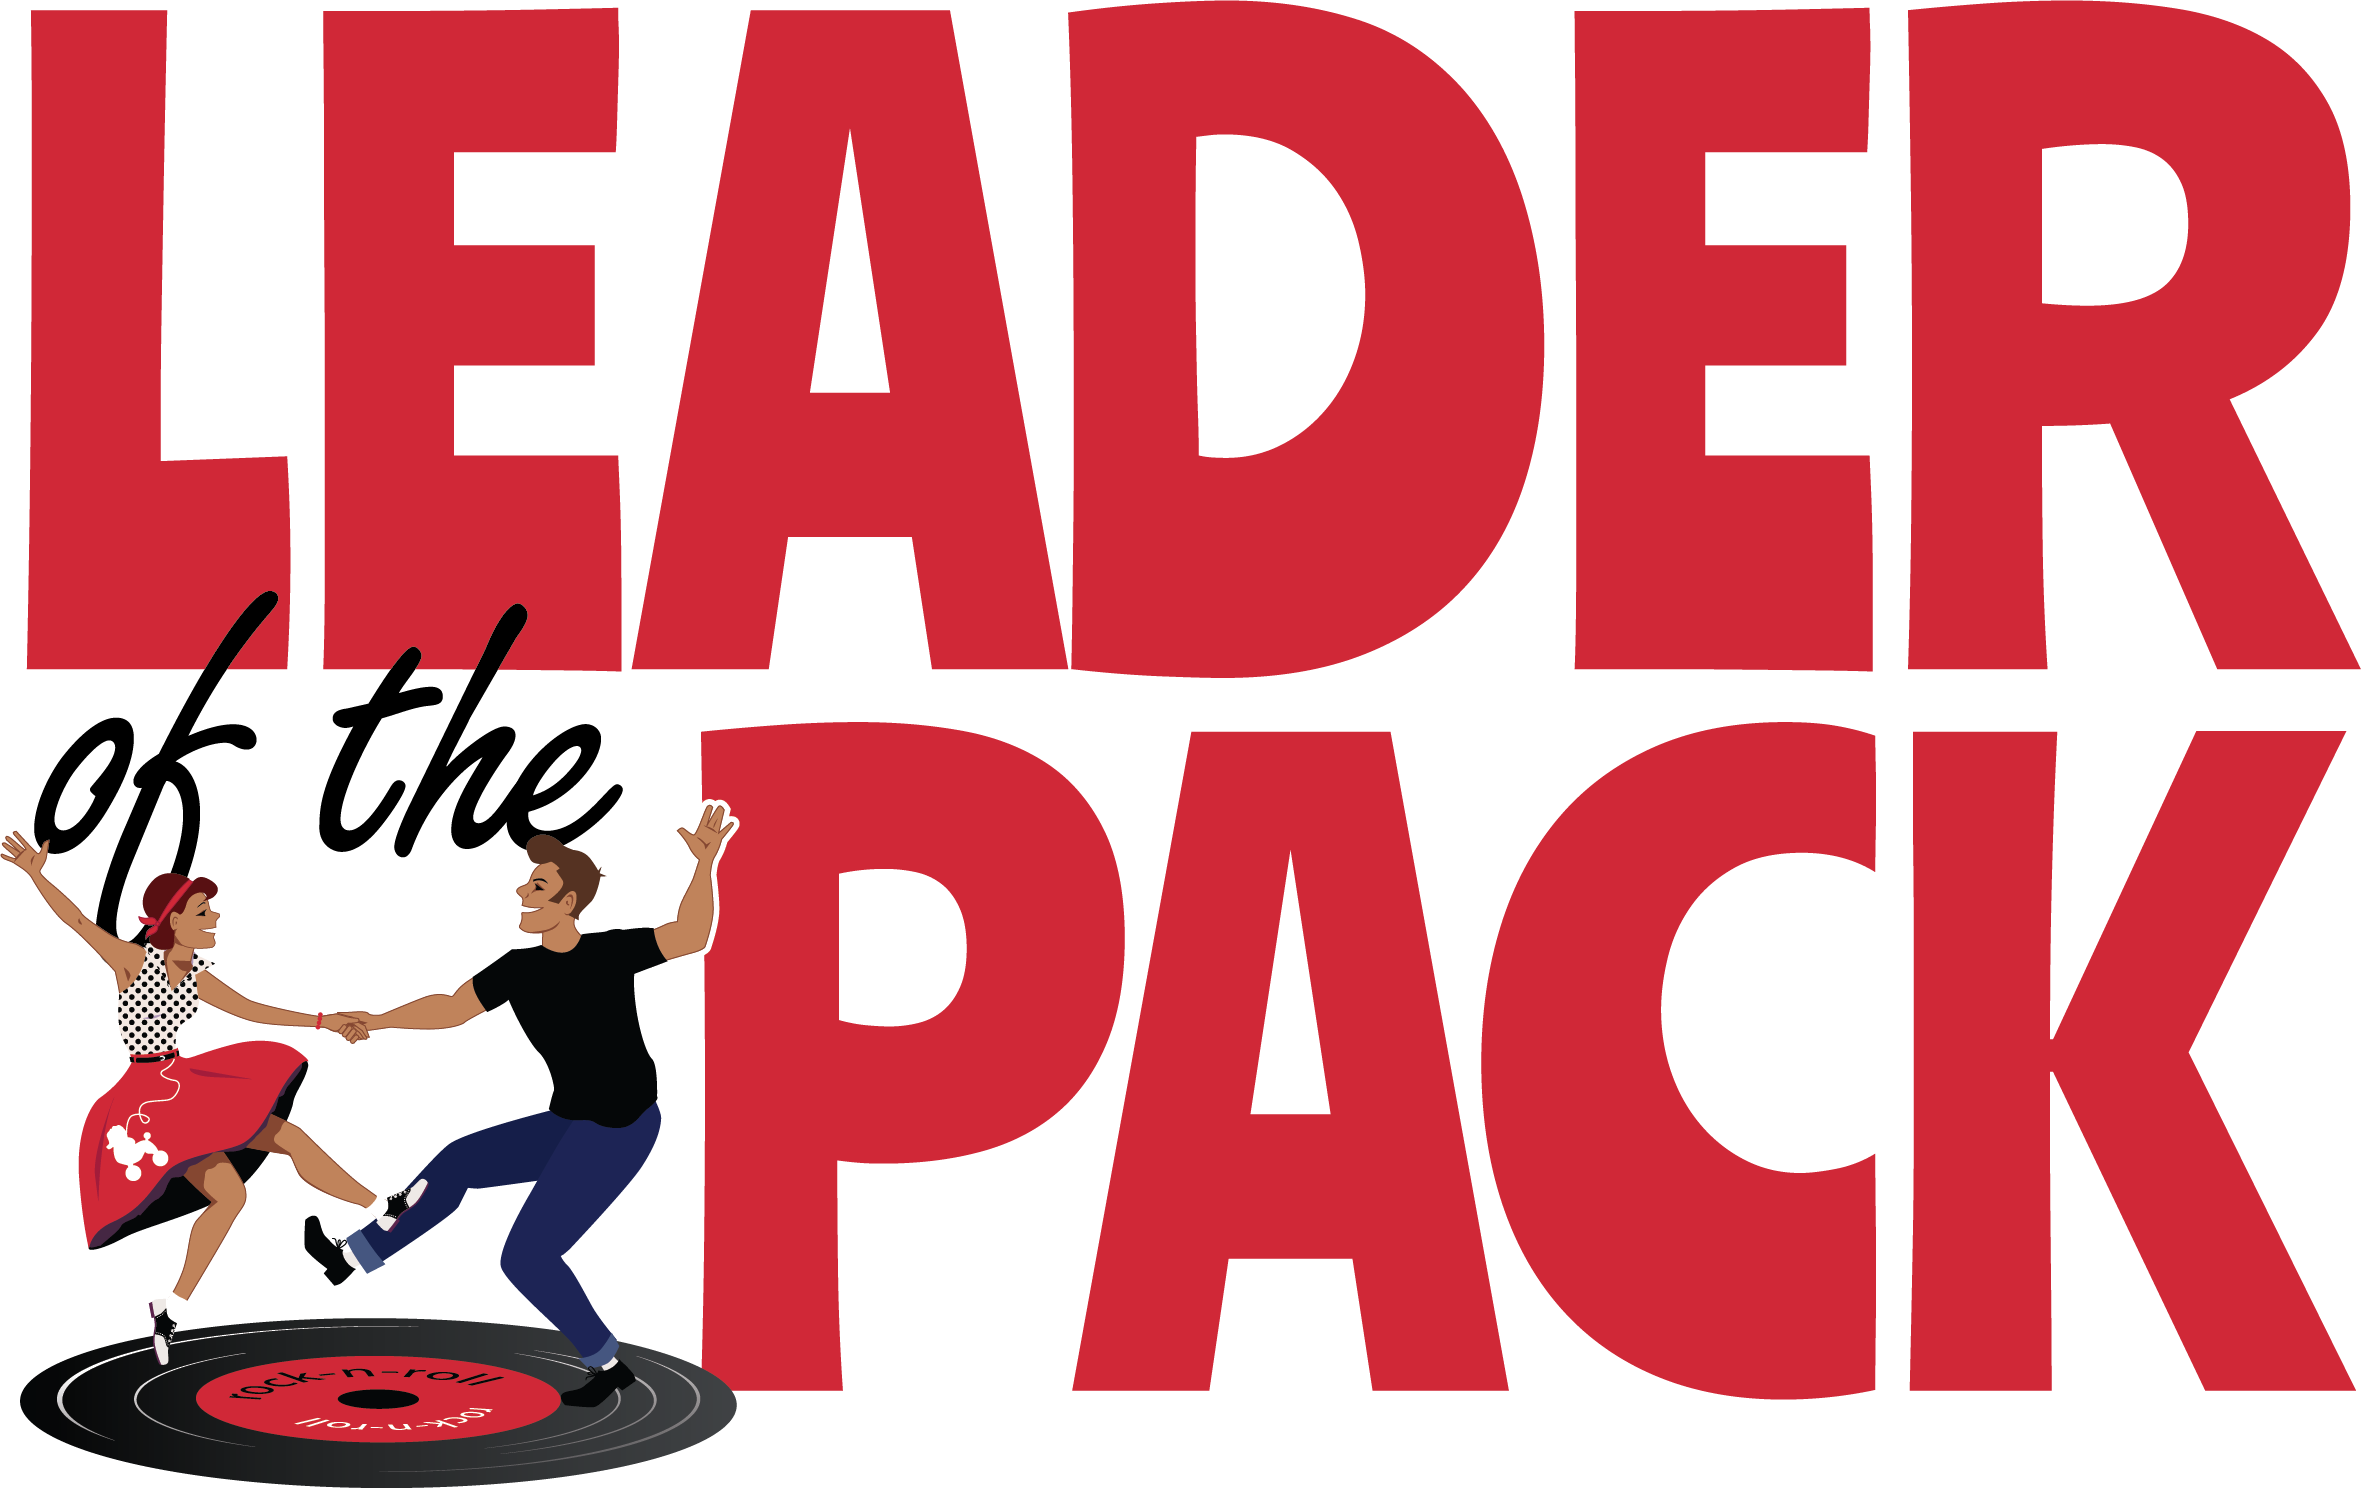 22-MCT-14808 - 2023 Season Play Logos Leader of the Pack